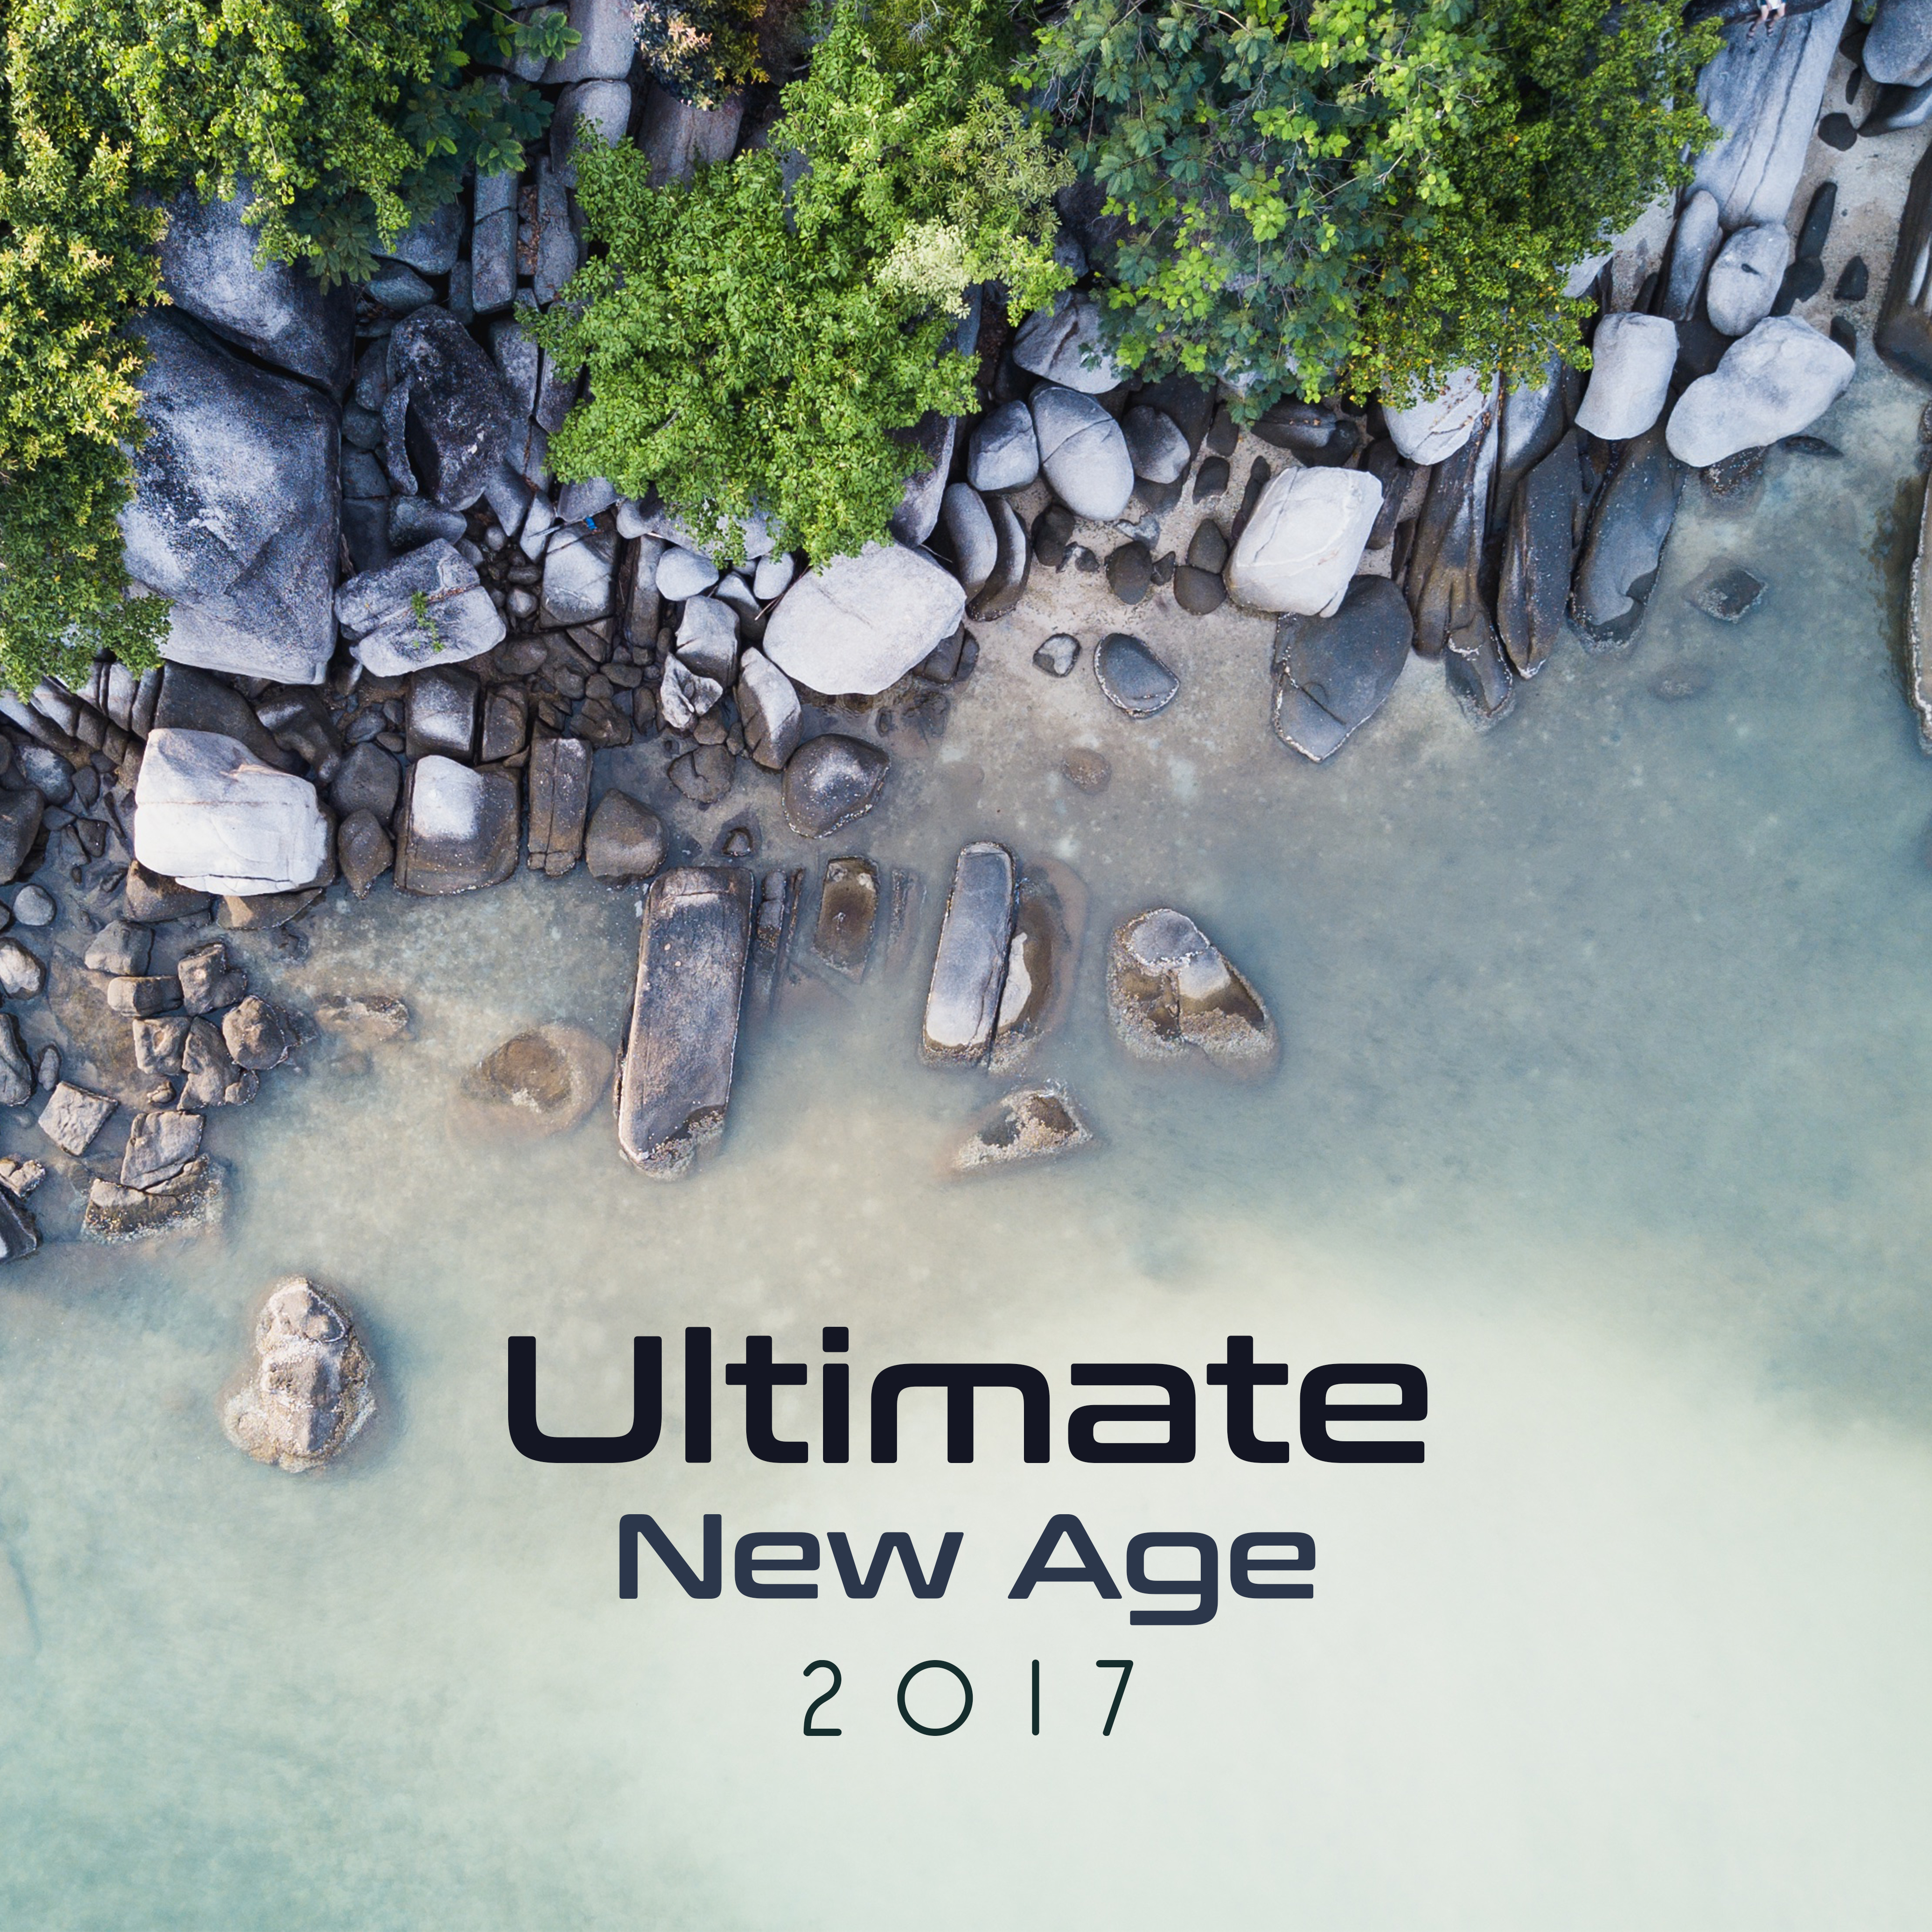 Ultimate New Age 2017  Relaxing Music, Sounds of Nature, Meditation, Zen, Bliss